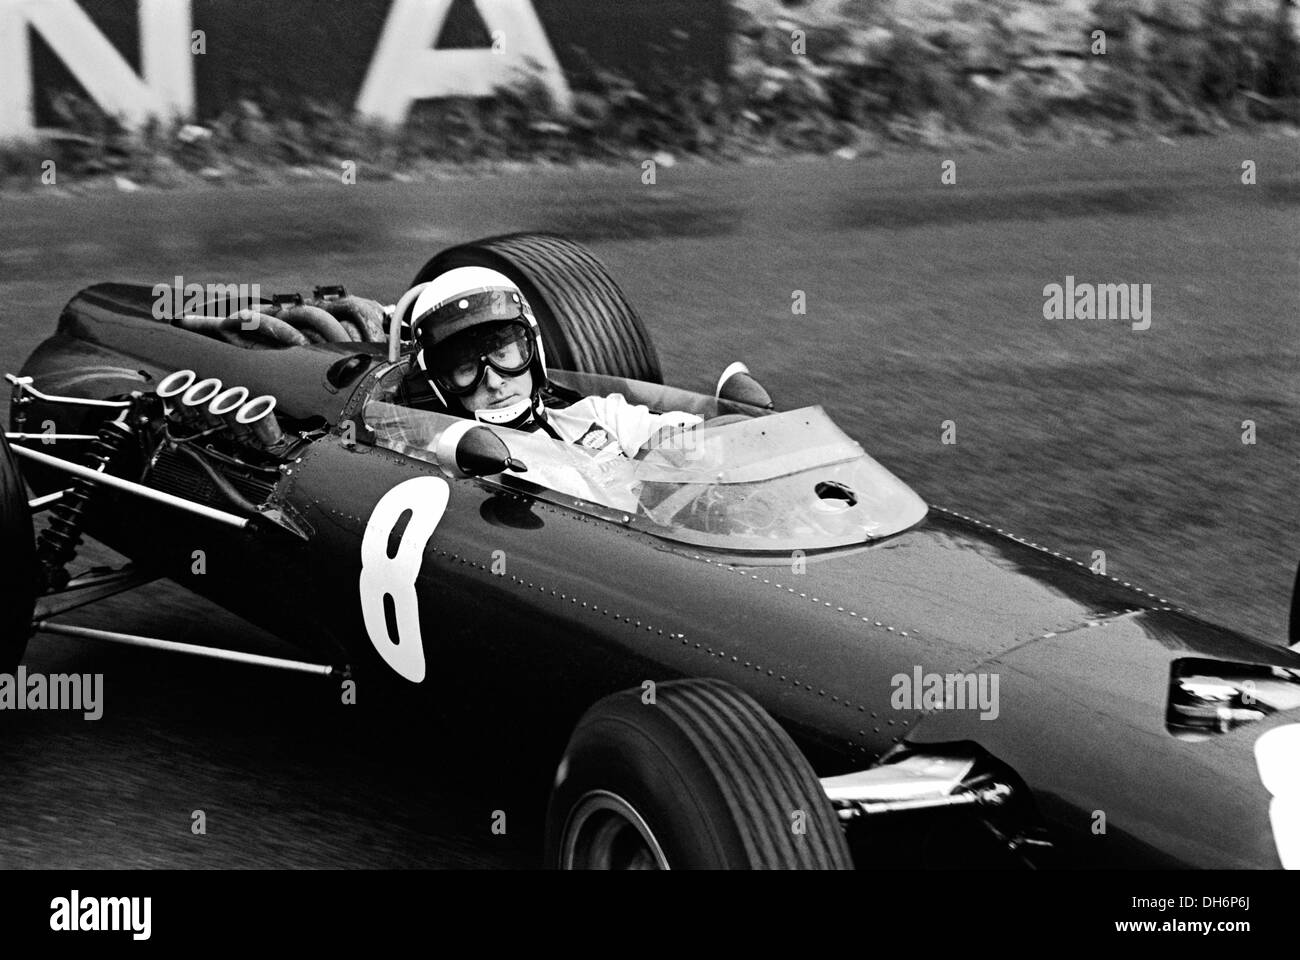 Jackie Stewart racing in his BRM P261 enters La Source hairpin at Spa Francorchamps, Belgium 13 June 1965. Stock Photo